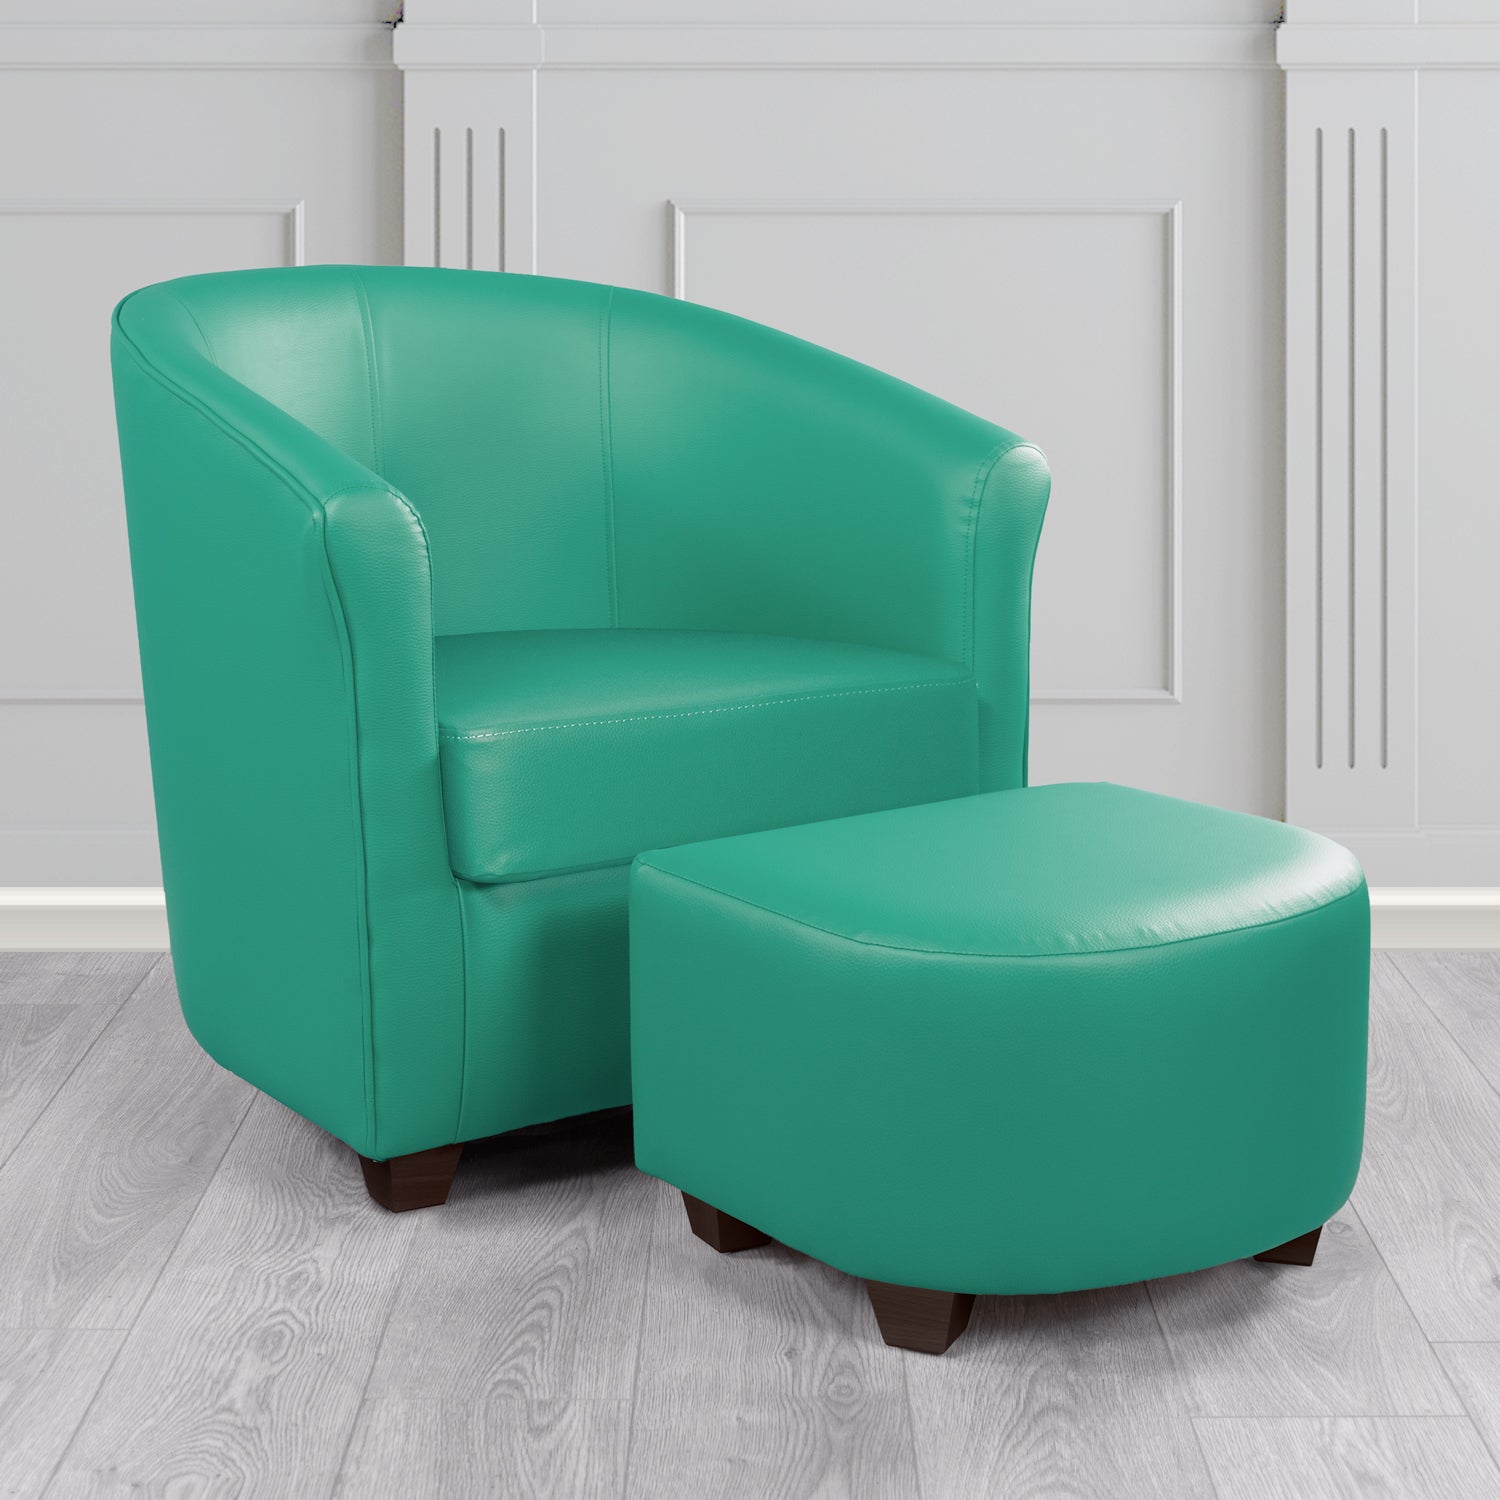 Cannes Tub Chair with Footstool Set in Just Colour Sea Green Crib 5 Faux Leather - The Tub Chair Shop